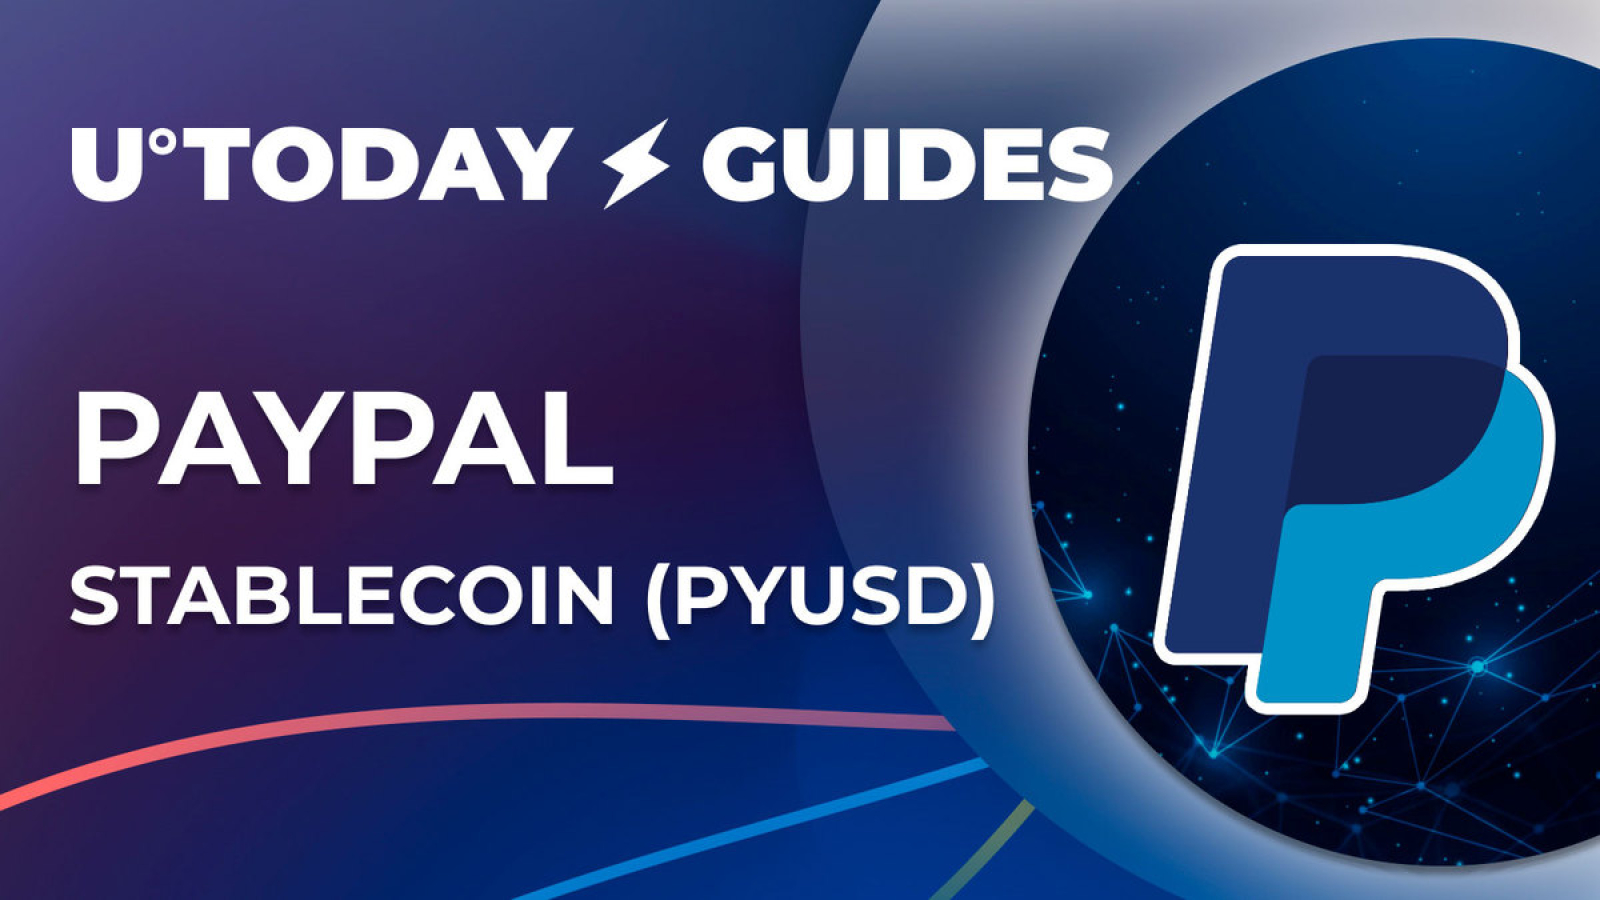 PayPal Launches PYUSD Stablecoin: Guide to What We Know So Far